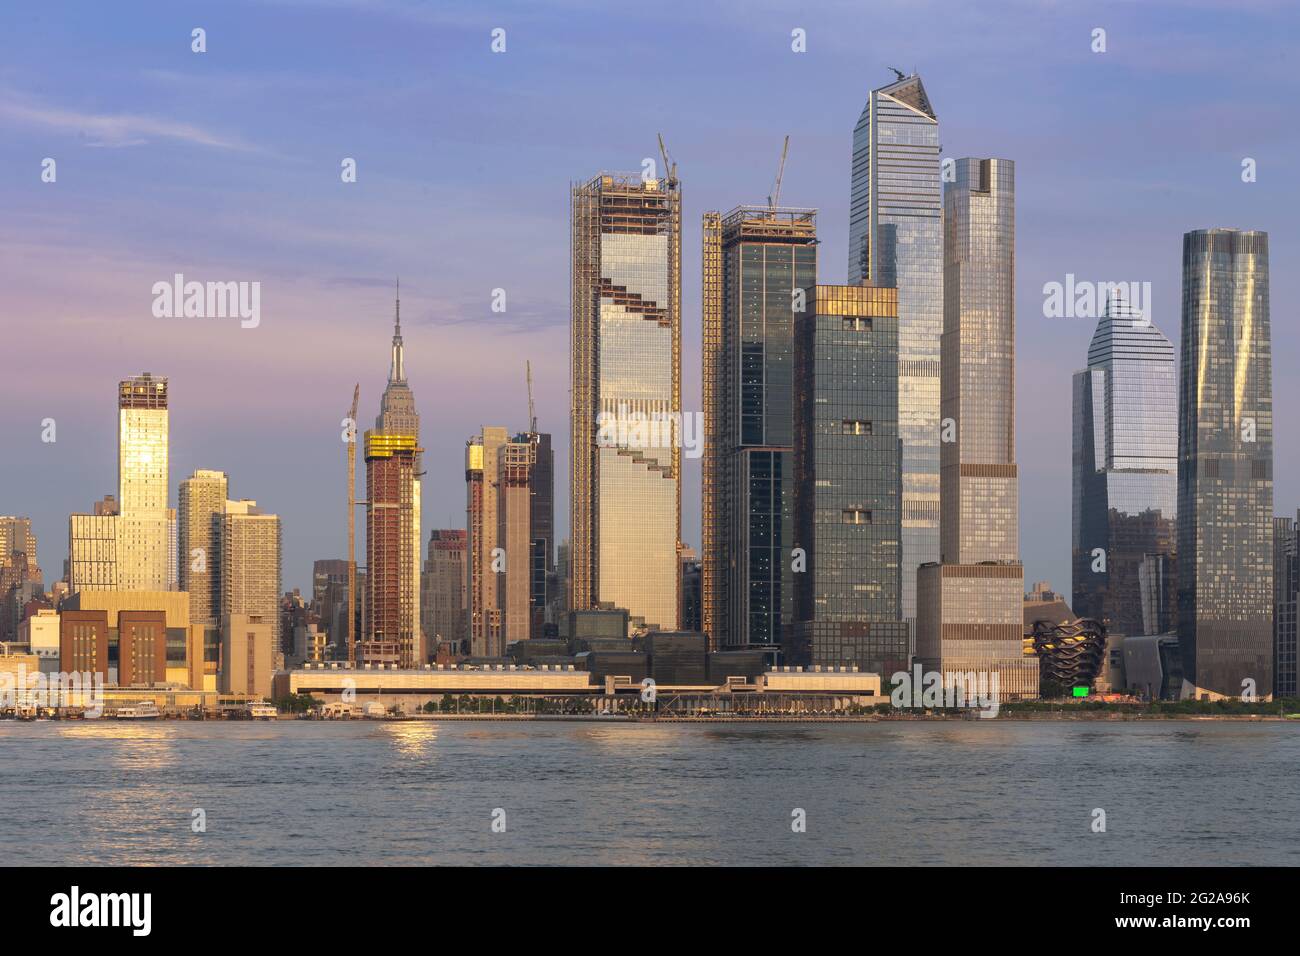 New York, NY - USA - June 7, 2021: Landscape view of Manhattan's westside, featuring the new Hudson Yards. Stock Photo